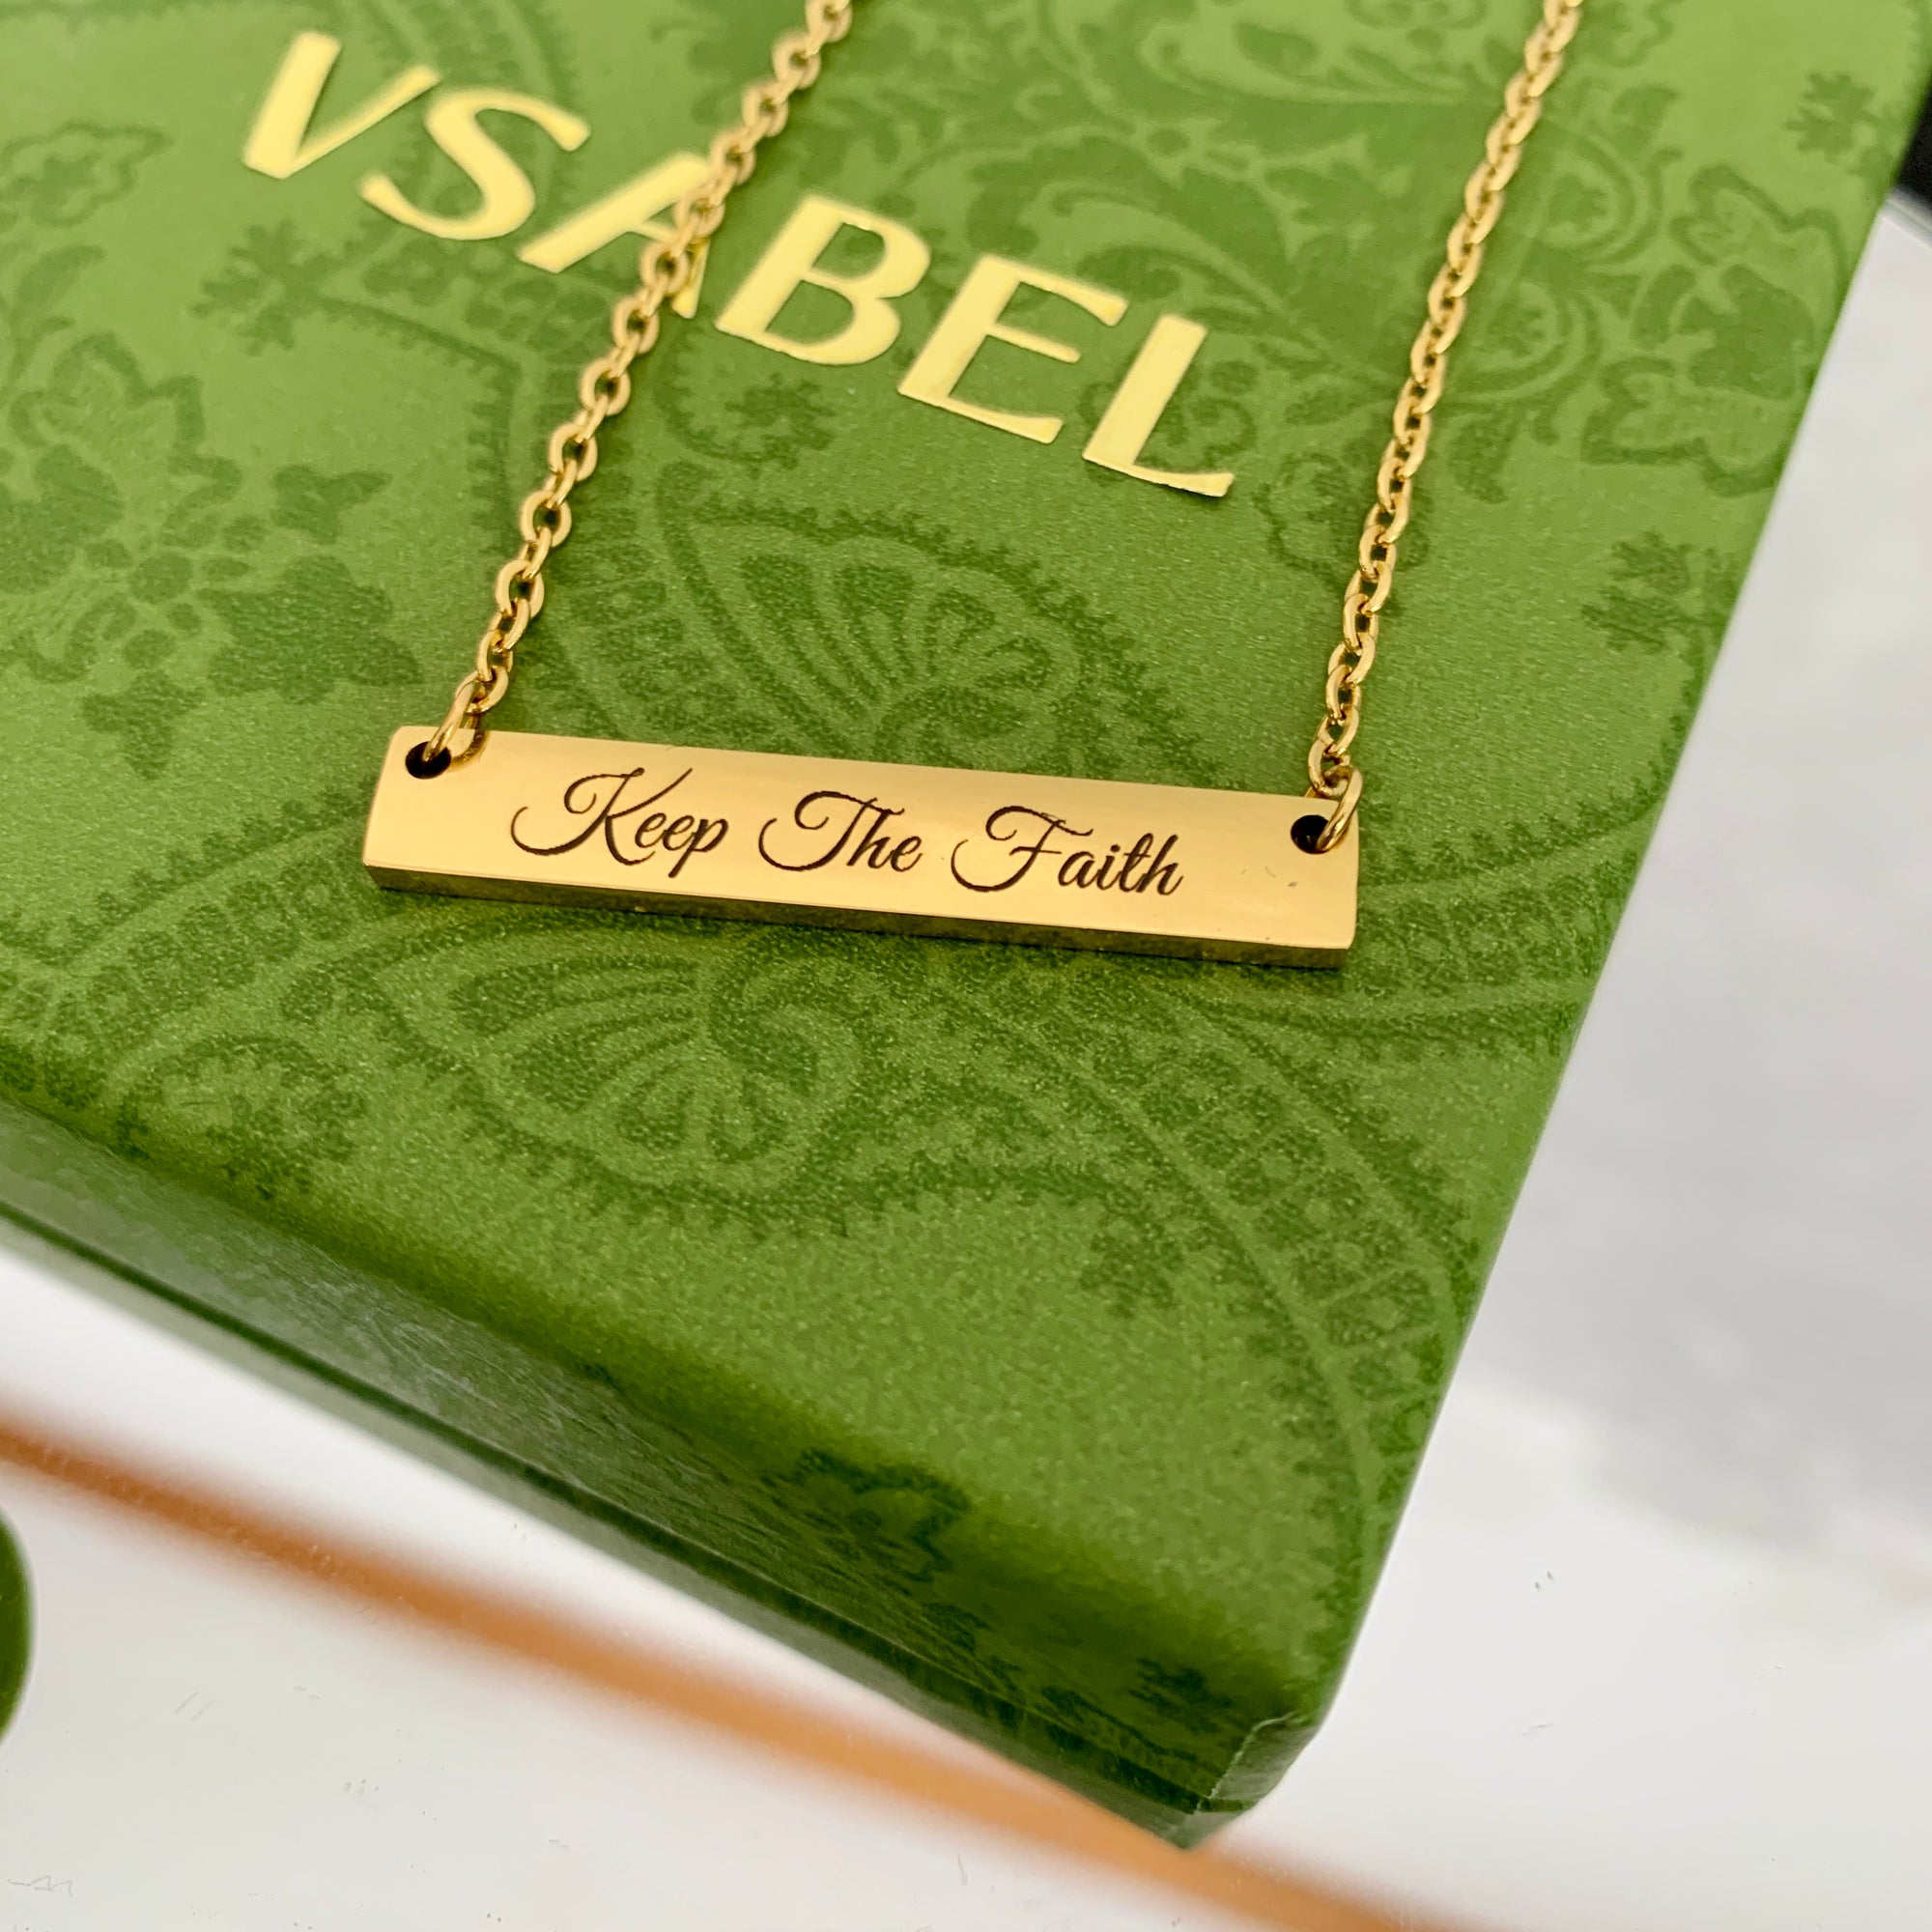 Keep The Faith Bar Necklace: The Perfect Meaningful Gift for Every Occasion